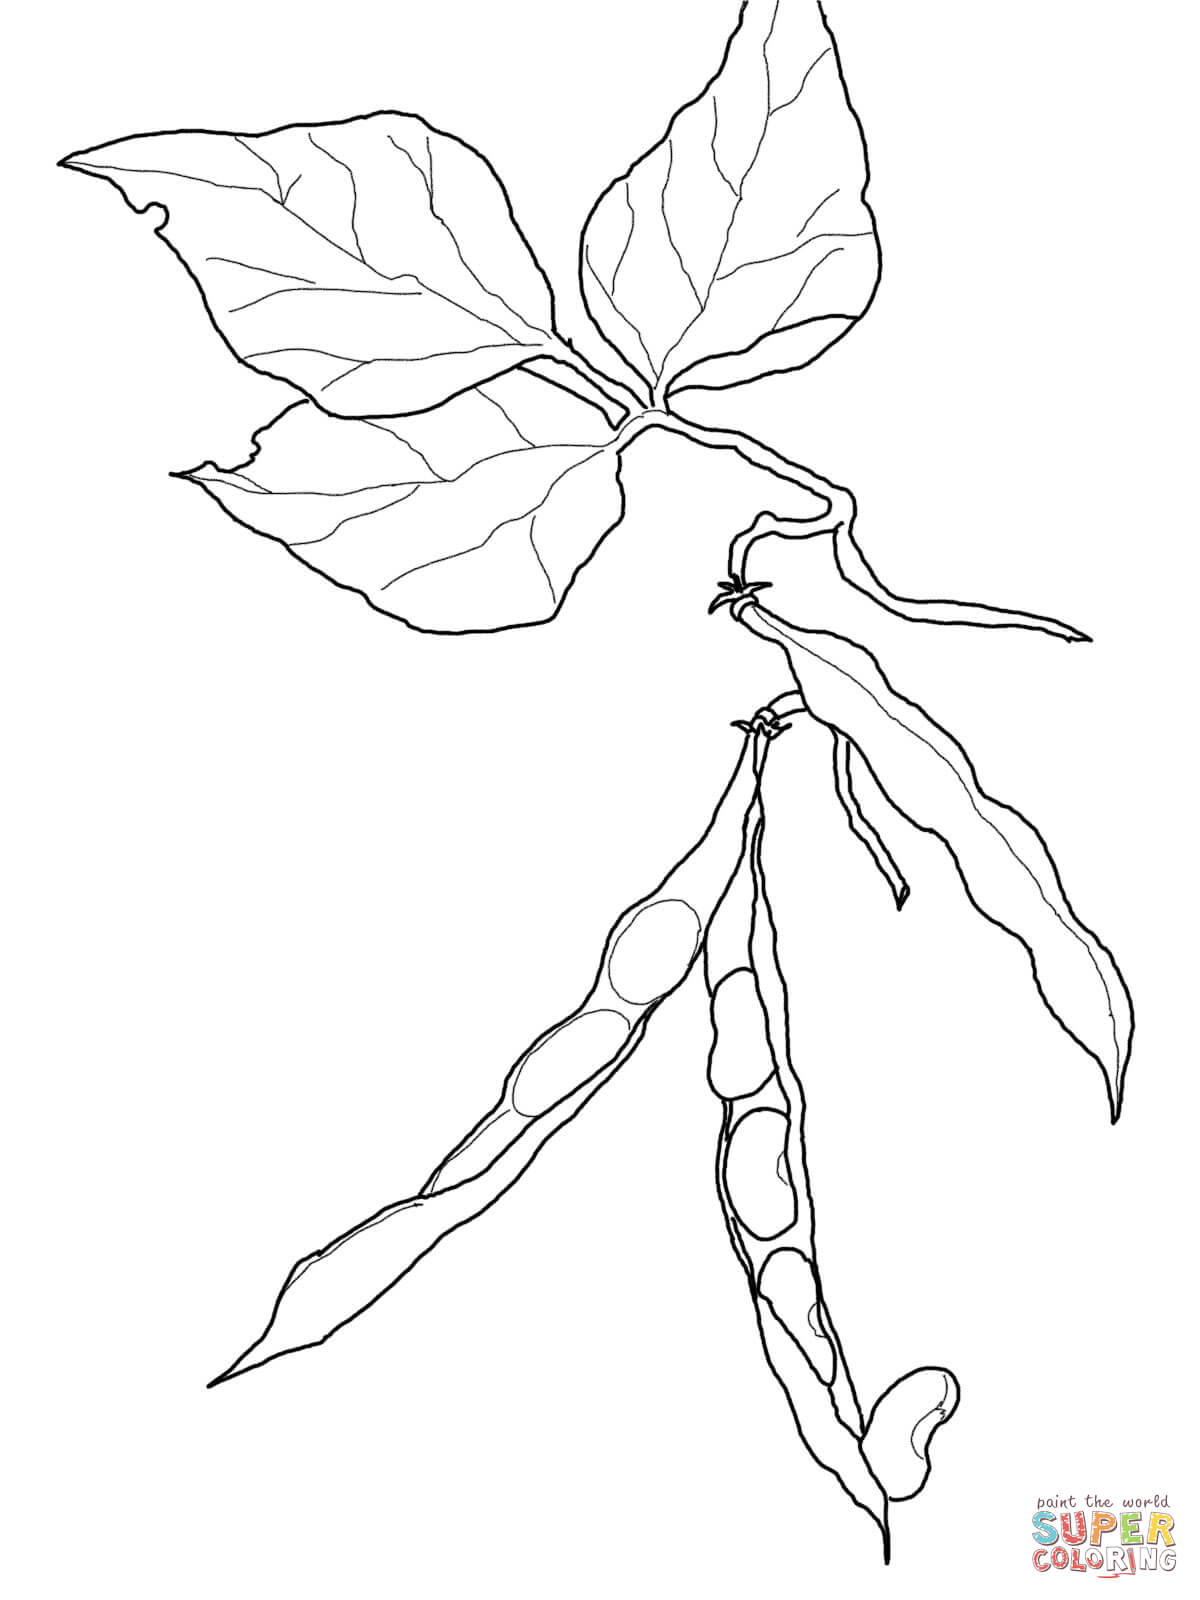 Green Beans Coloring Page Green Bean Coloring Page Free Printable Coloring Pages Coloring Home